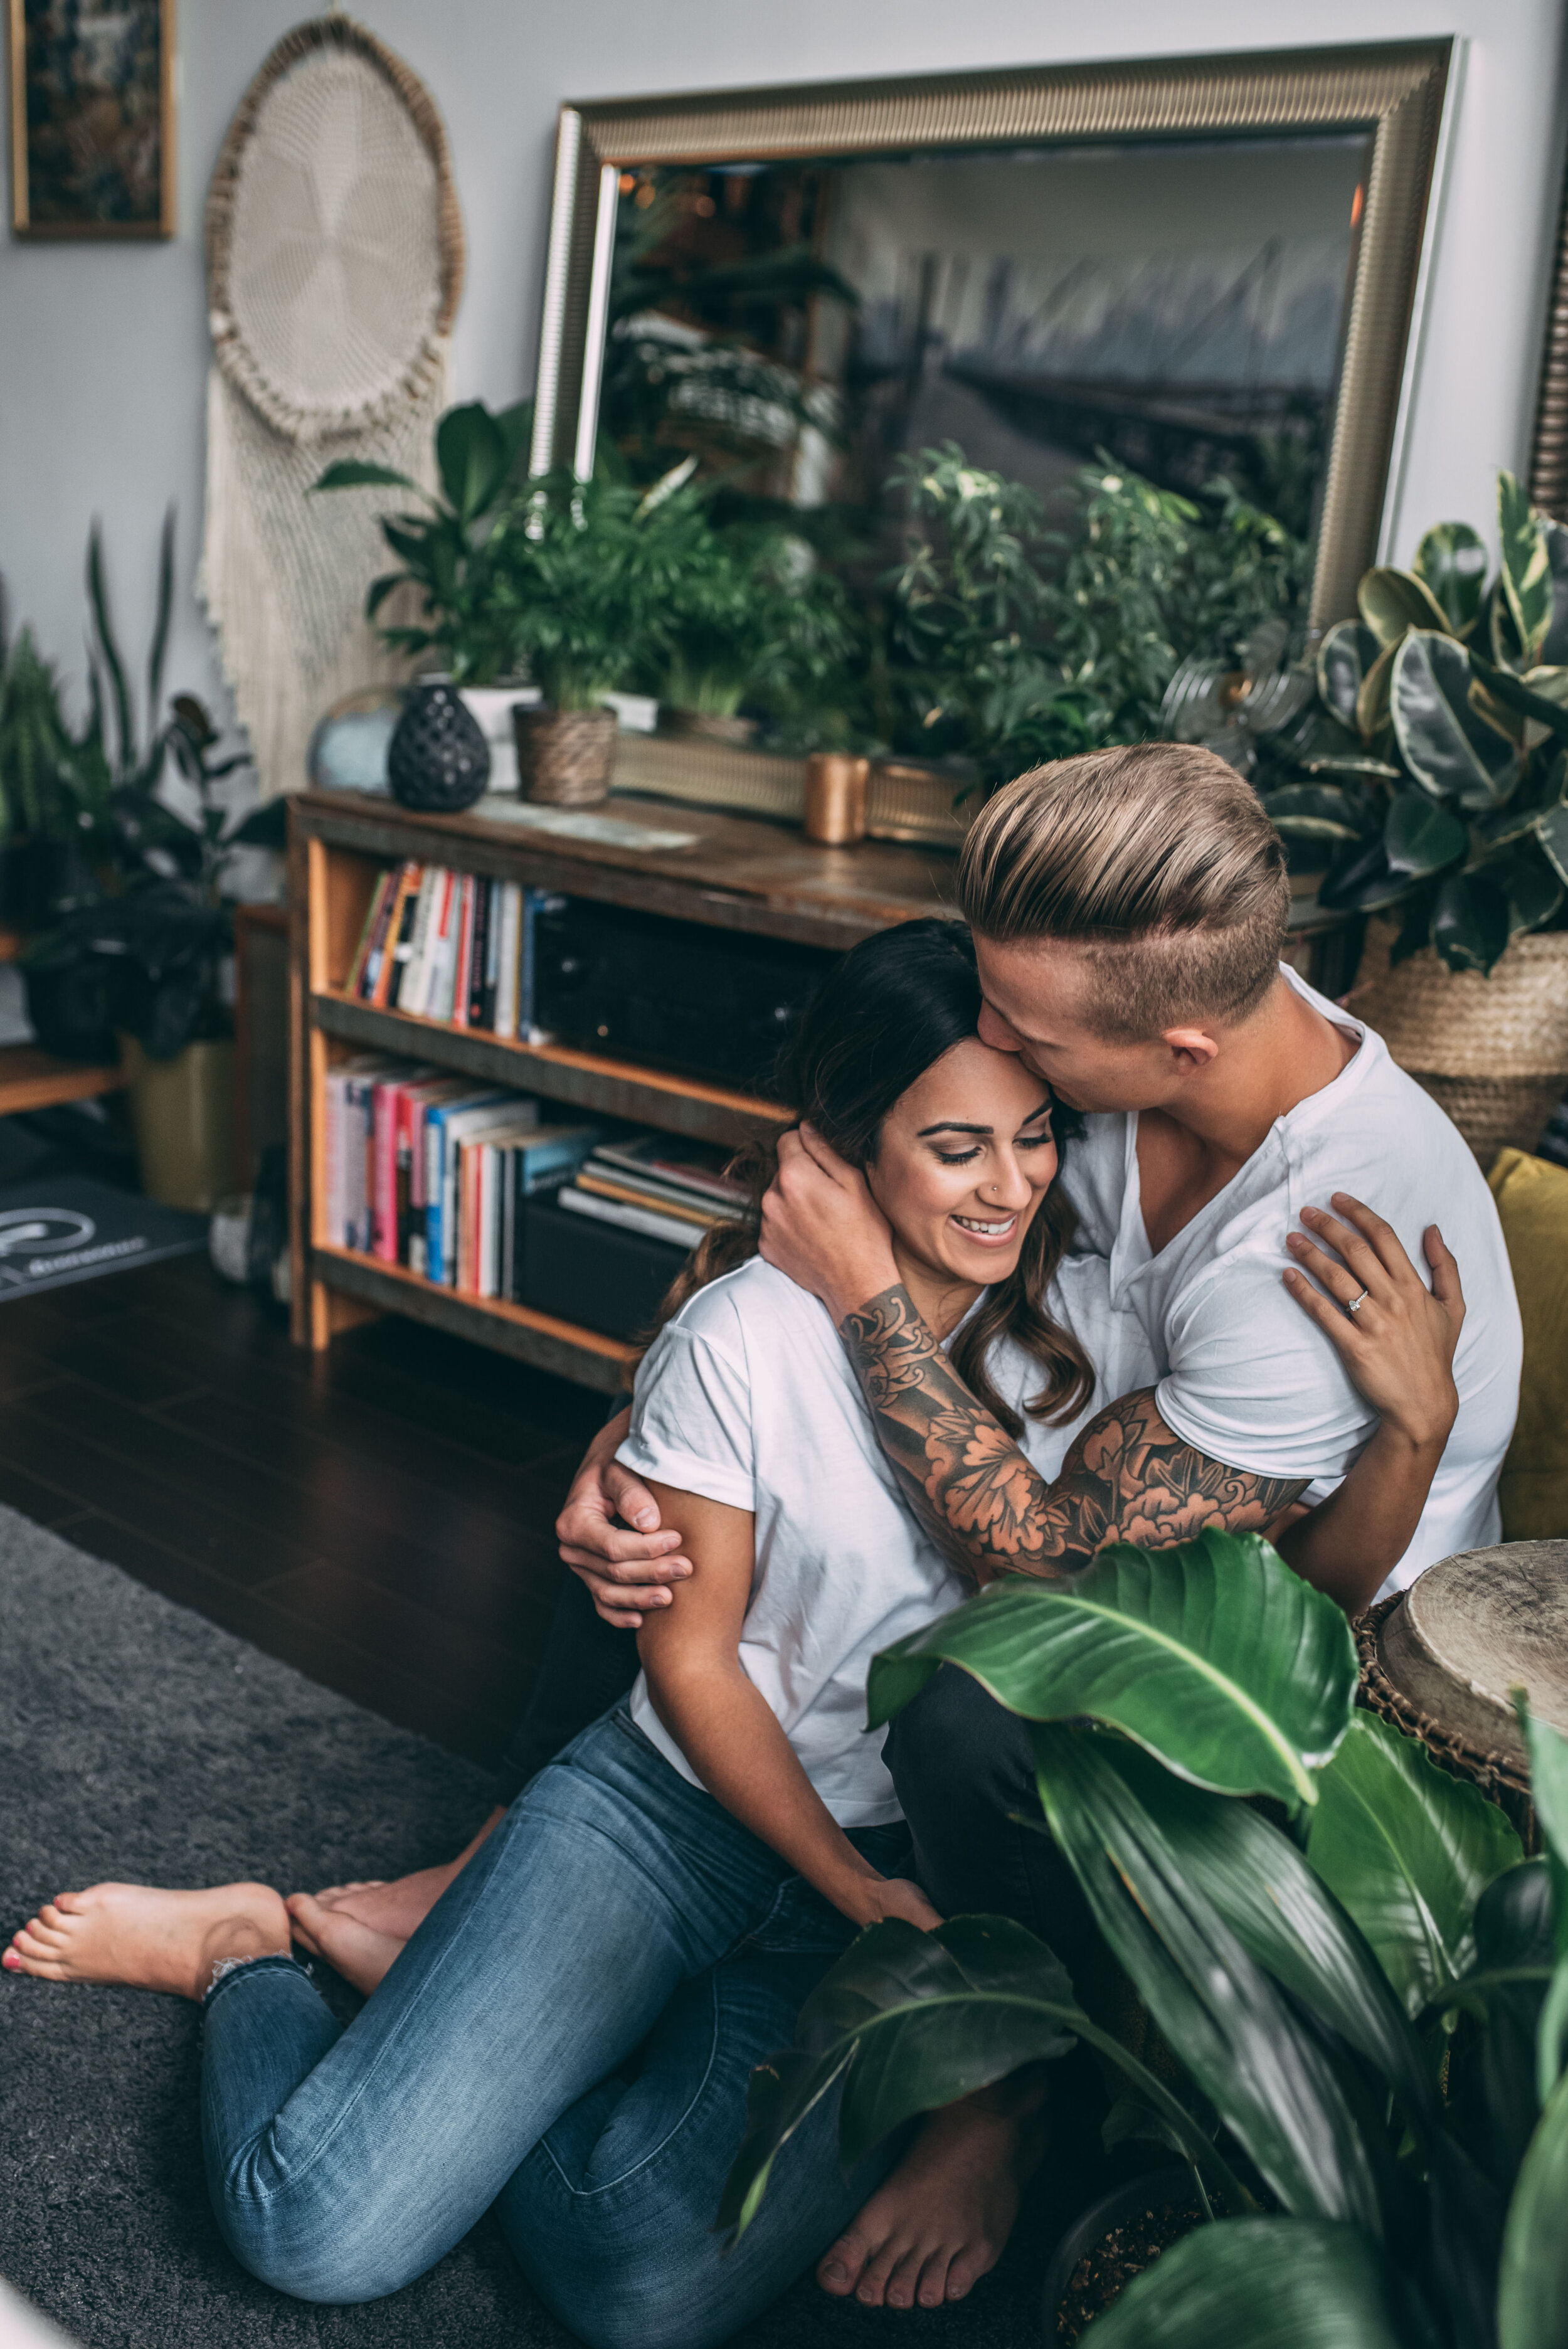 Vancouver Engagement Session - In Home Couples Session - Loft Garden Oasis - Laura Olson Photography - Sunshine Coast BC & Vancouver Wedding & Elopement Photographer7591.jpg